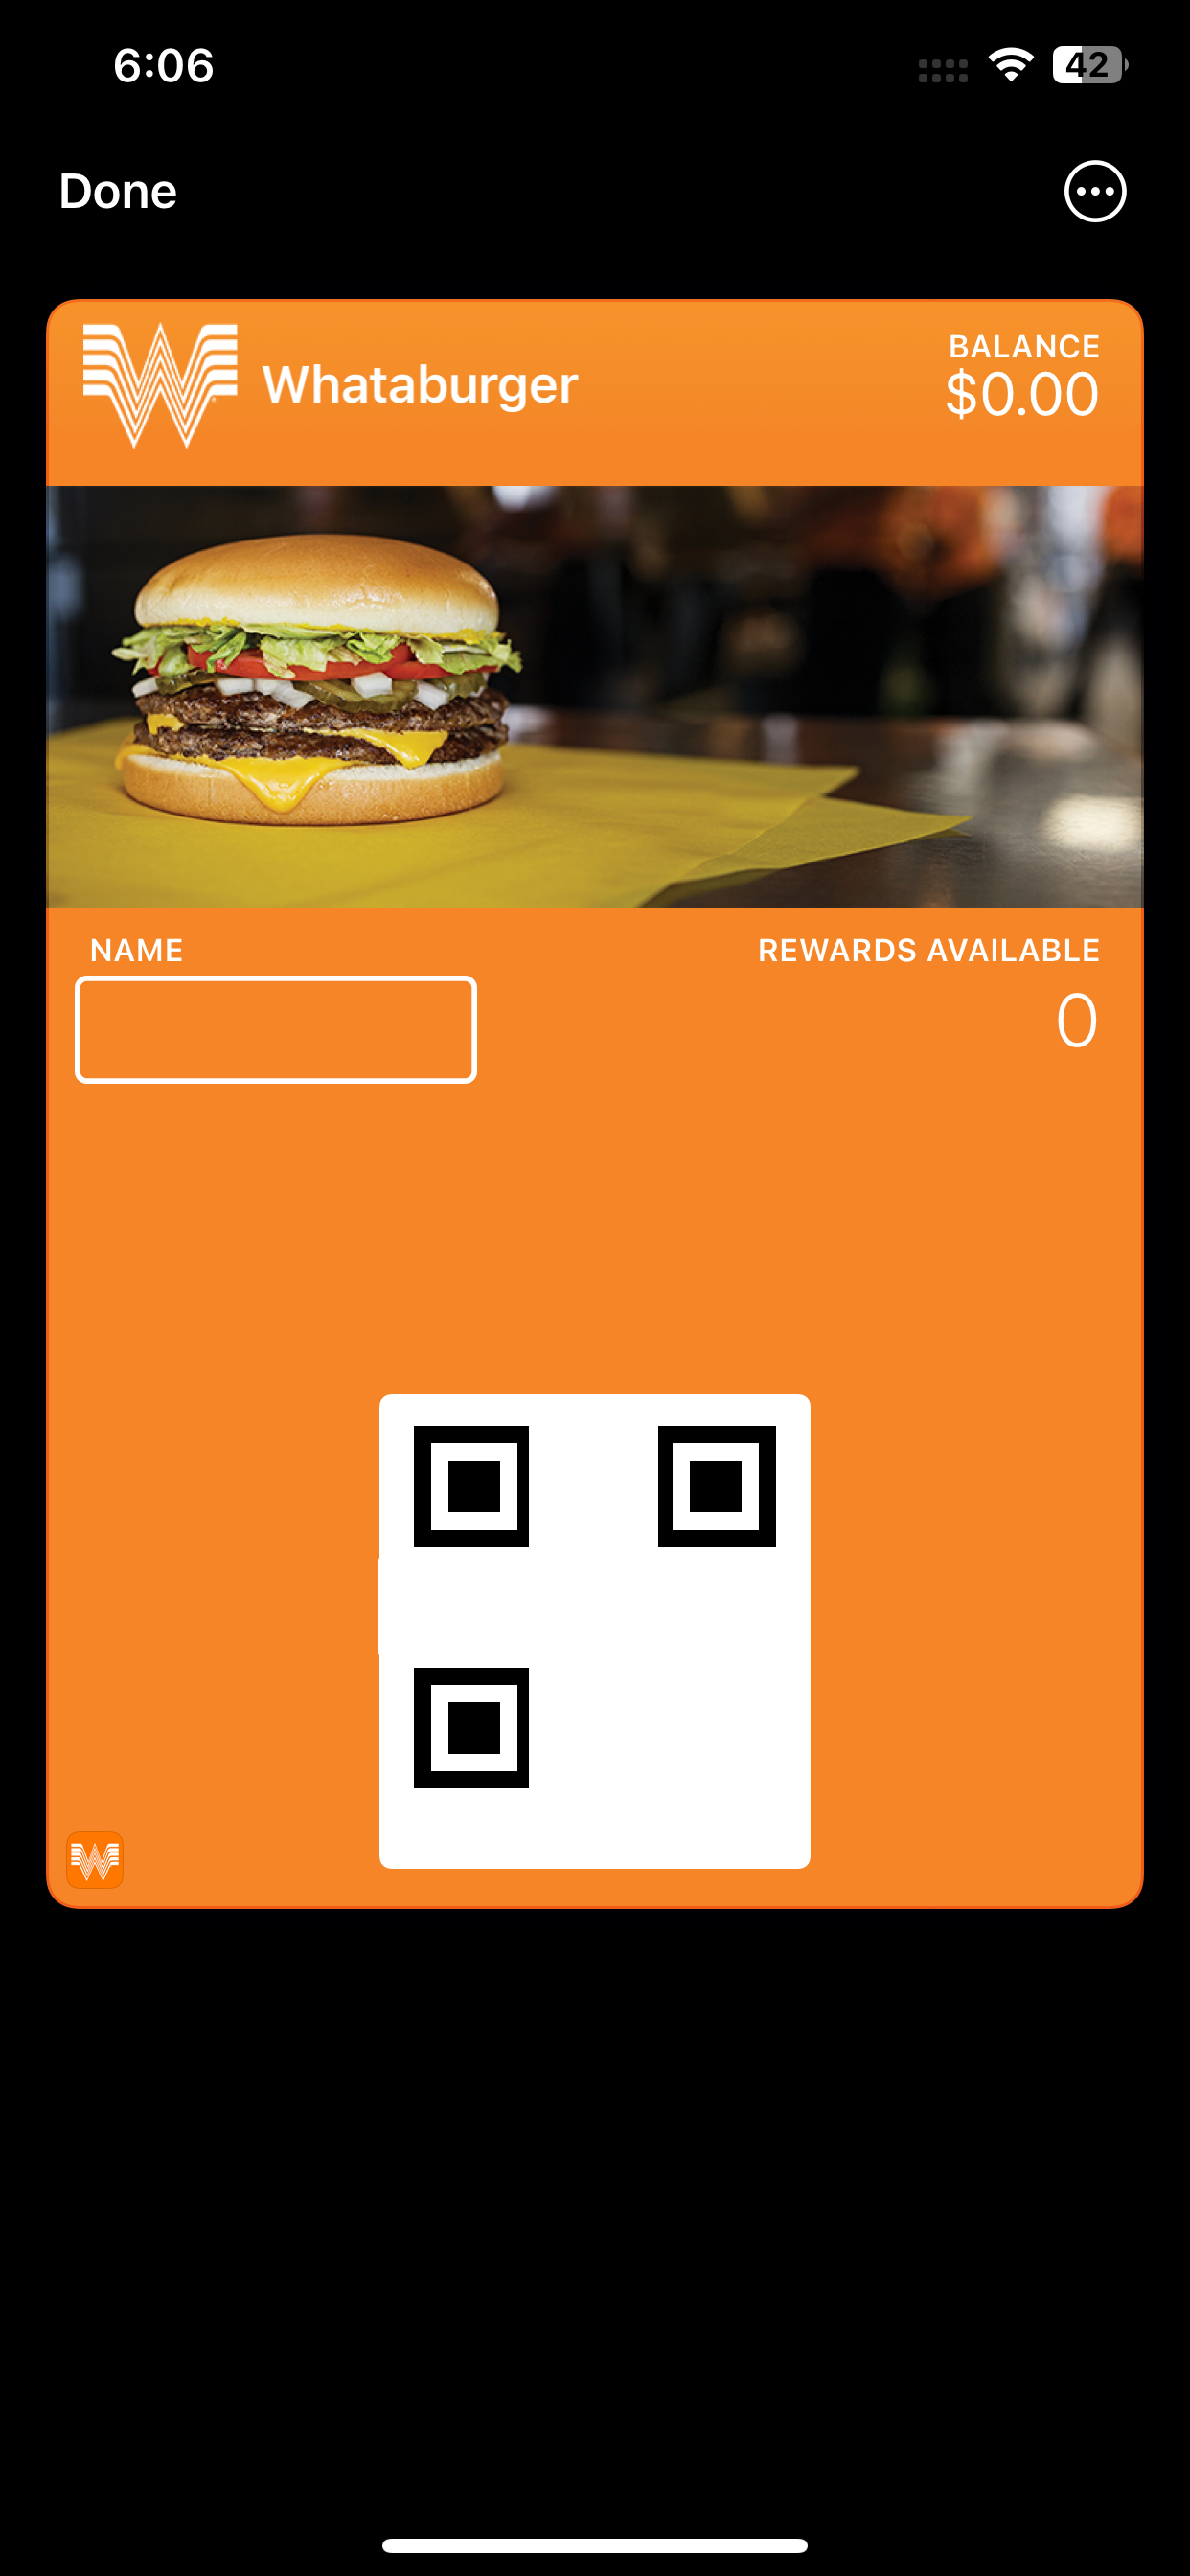 Whataburger allows its Whataburger Rewards pass to be added to Apple Wallet.